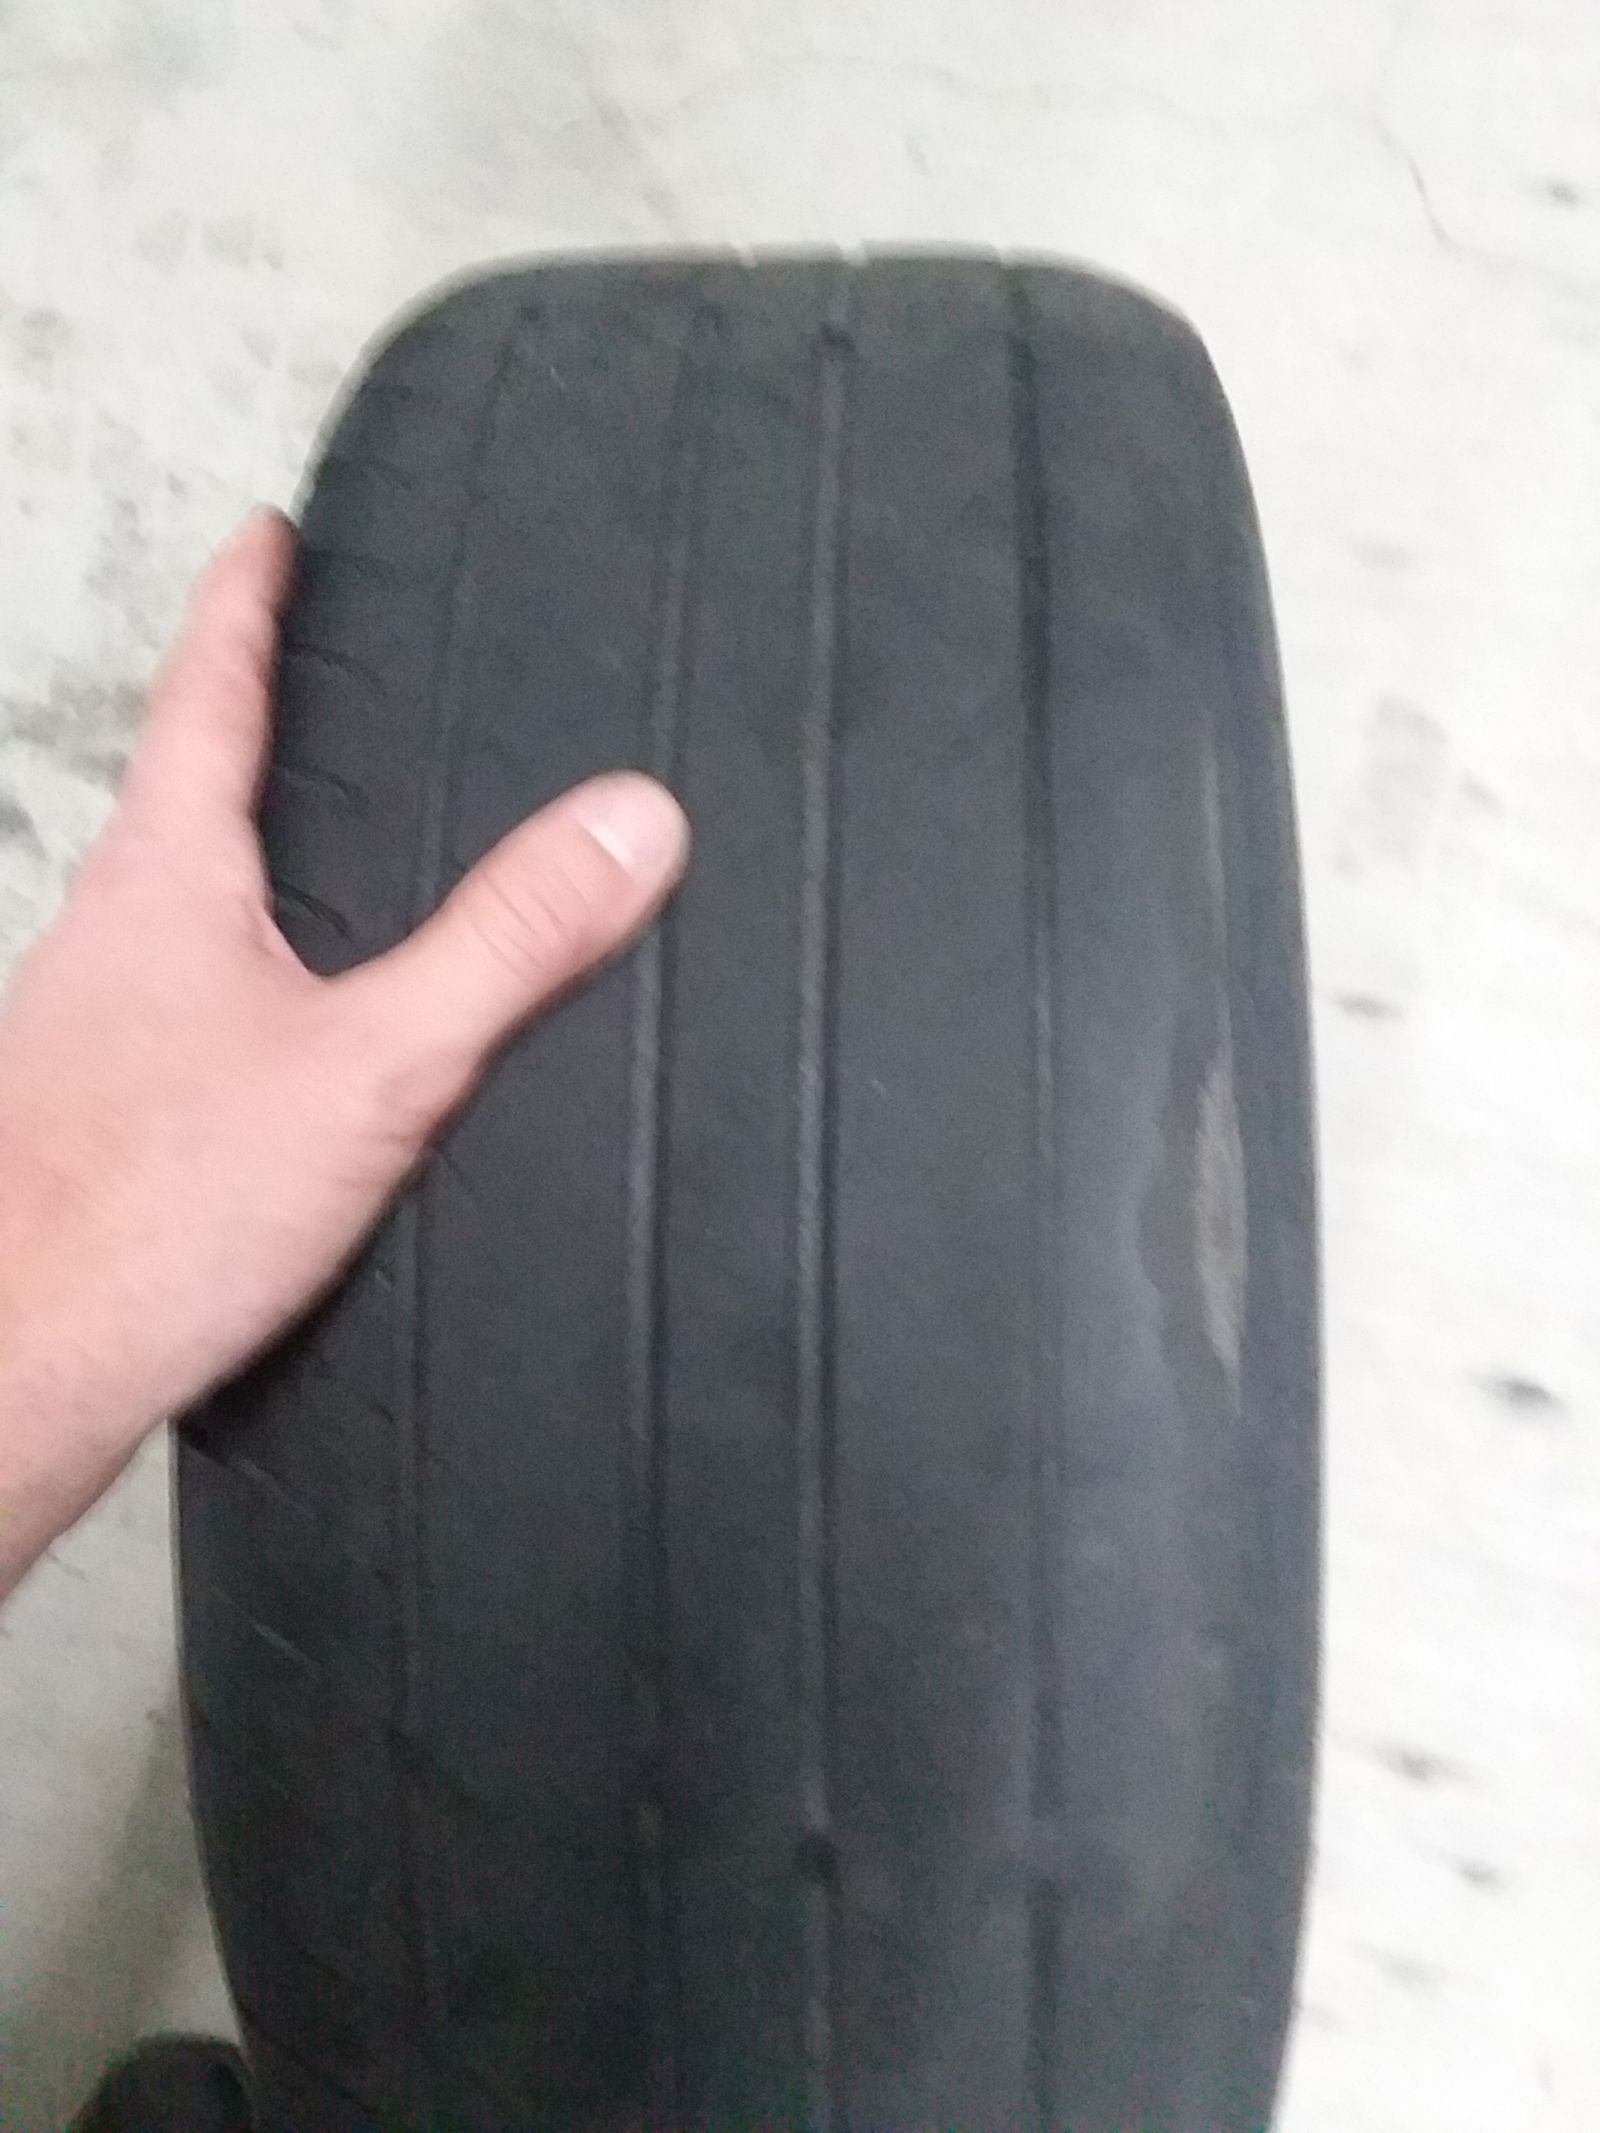 Only one tire is like this. Another is pretty worn but usable. And then two are like new. So I’ll just toss the two worst tires and keep my two best ones